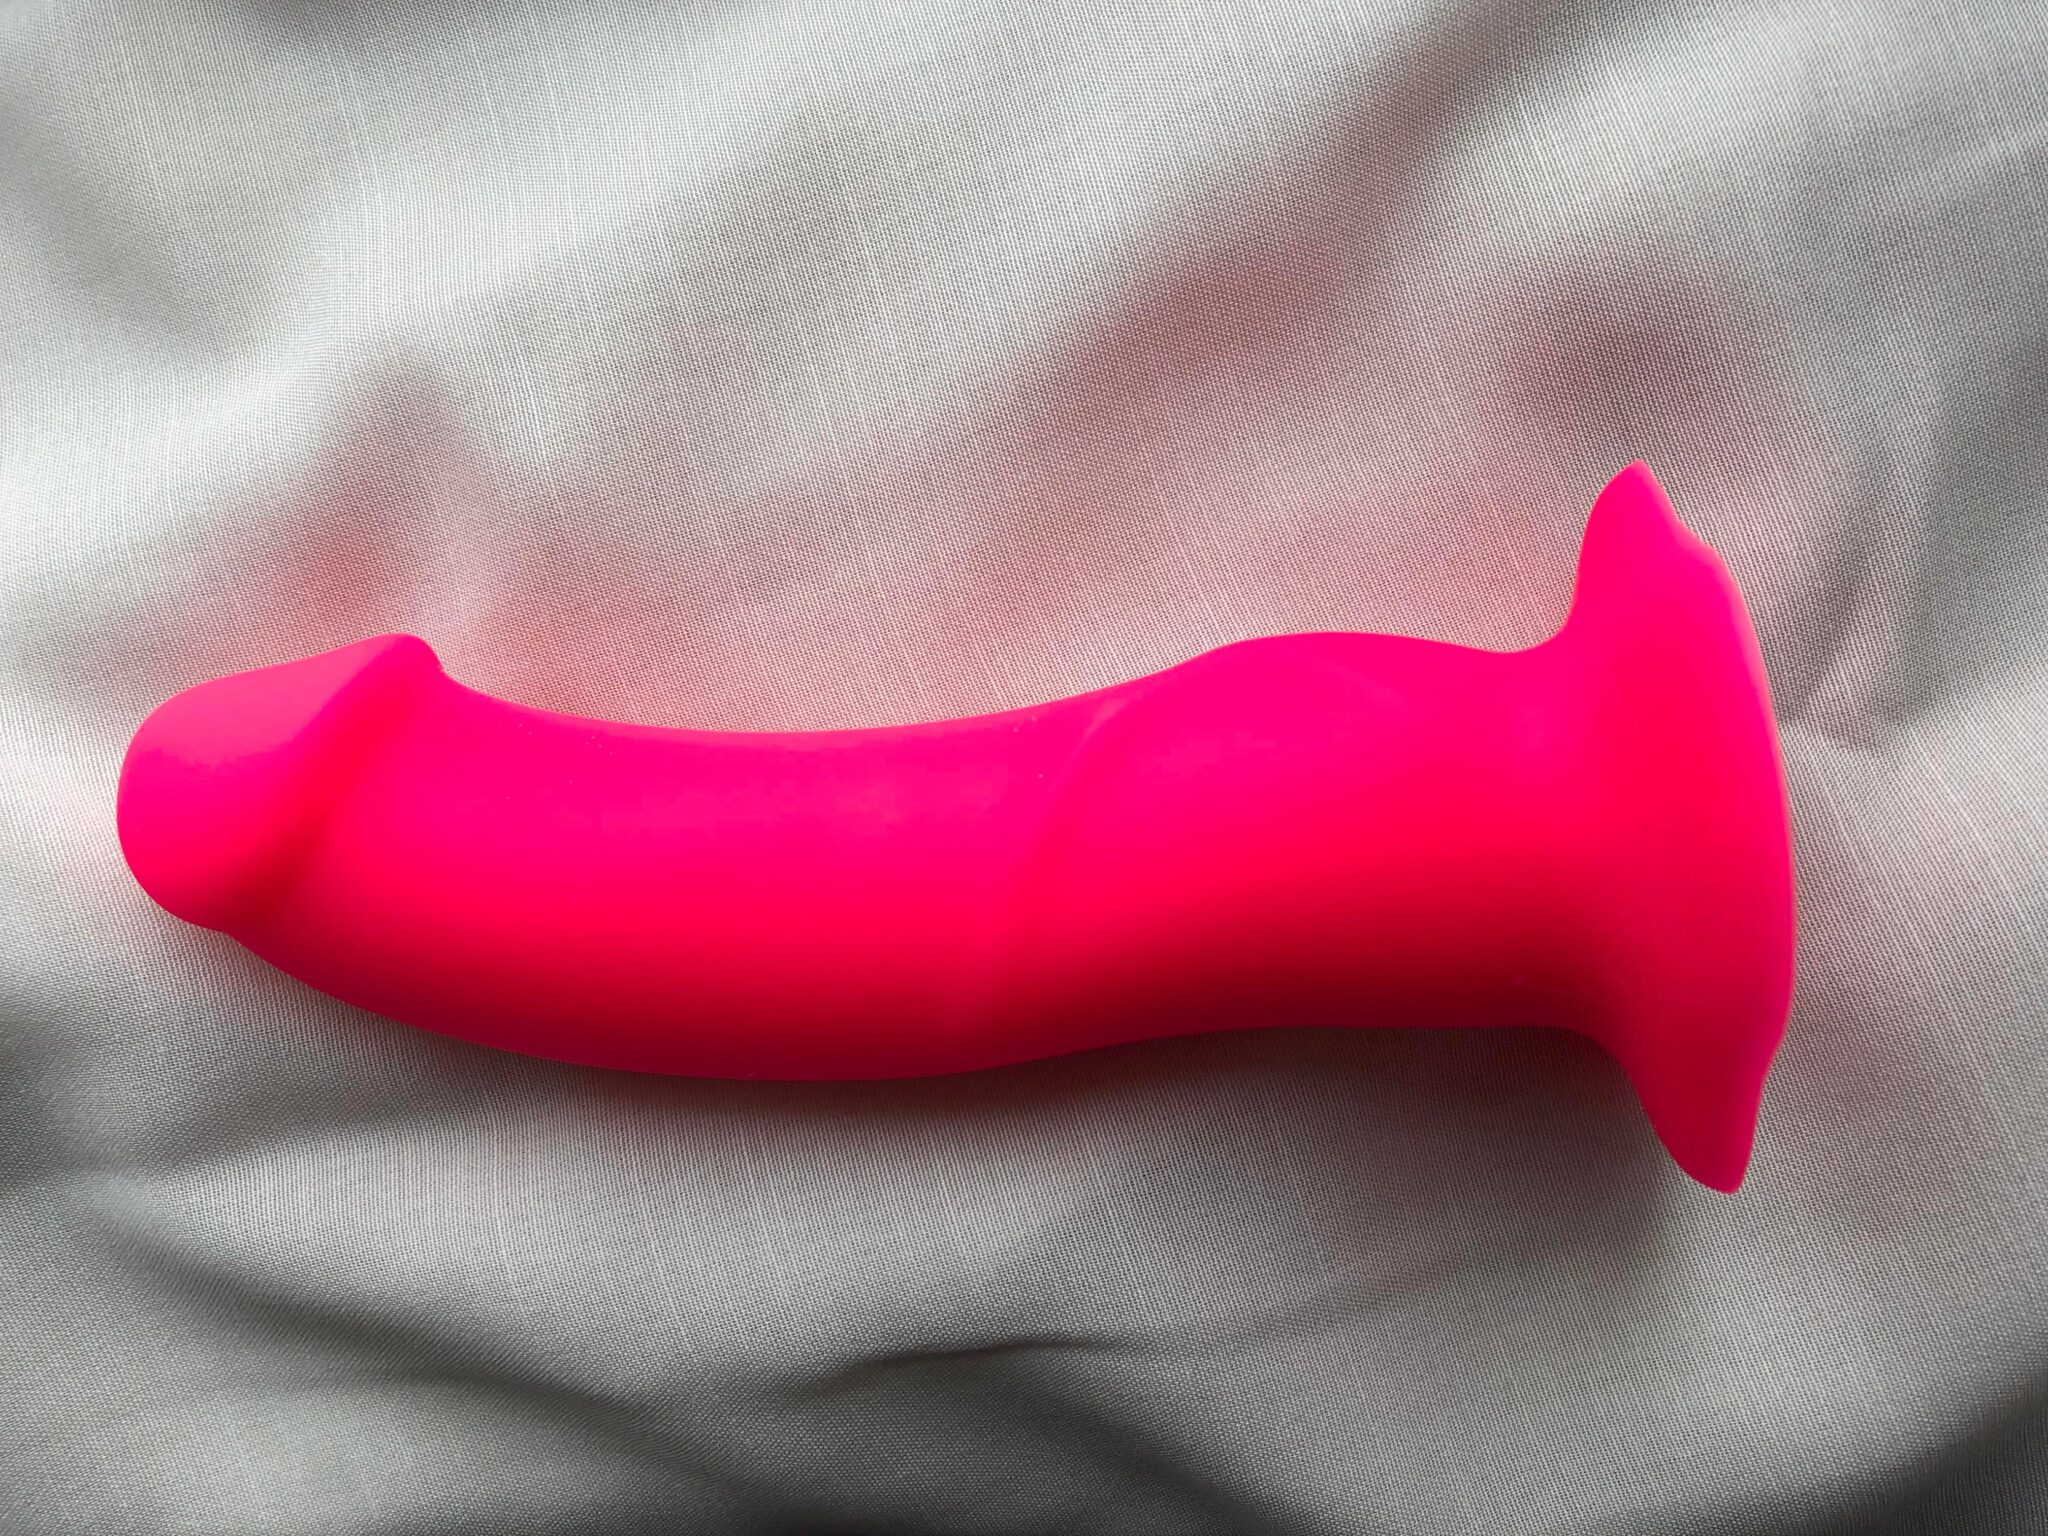 Fun Factory The Boss Pink Silicone Dildo. Slide 3